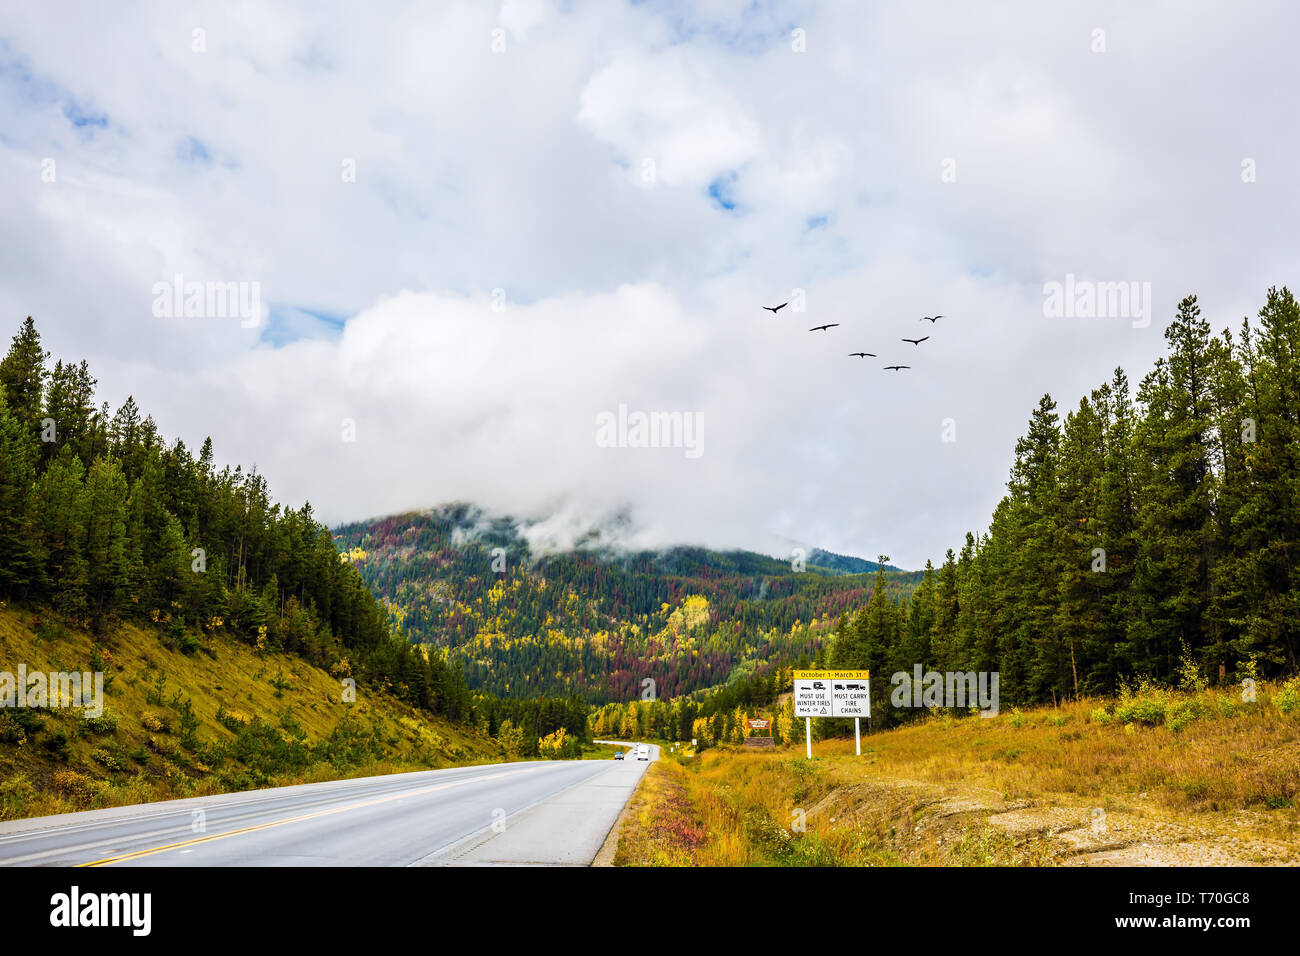 The nature of the Rockies of Canada Stock Photo